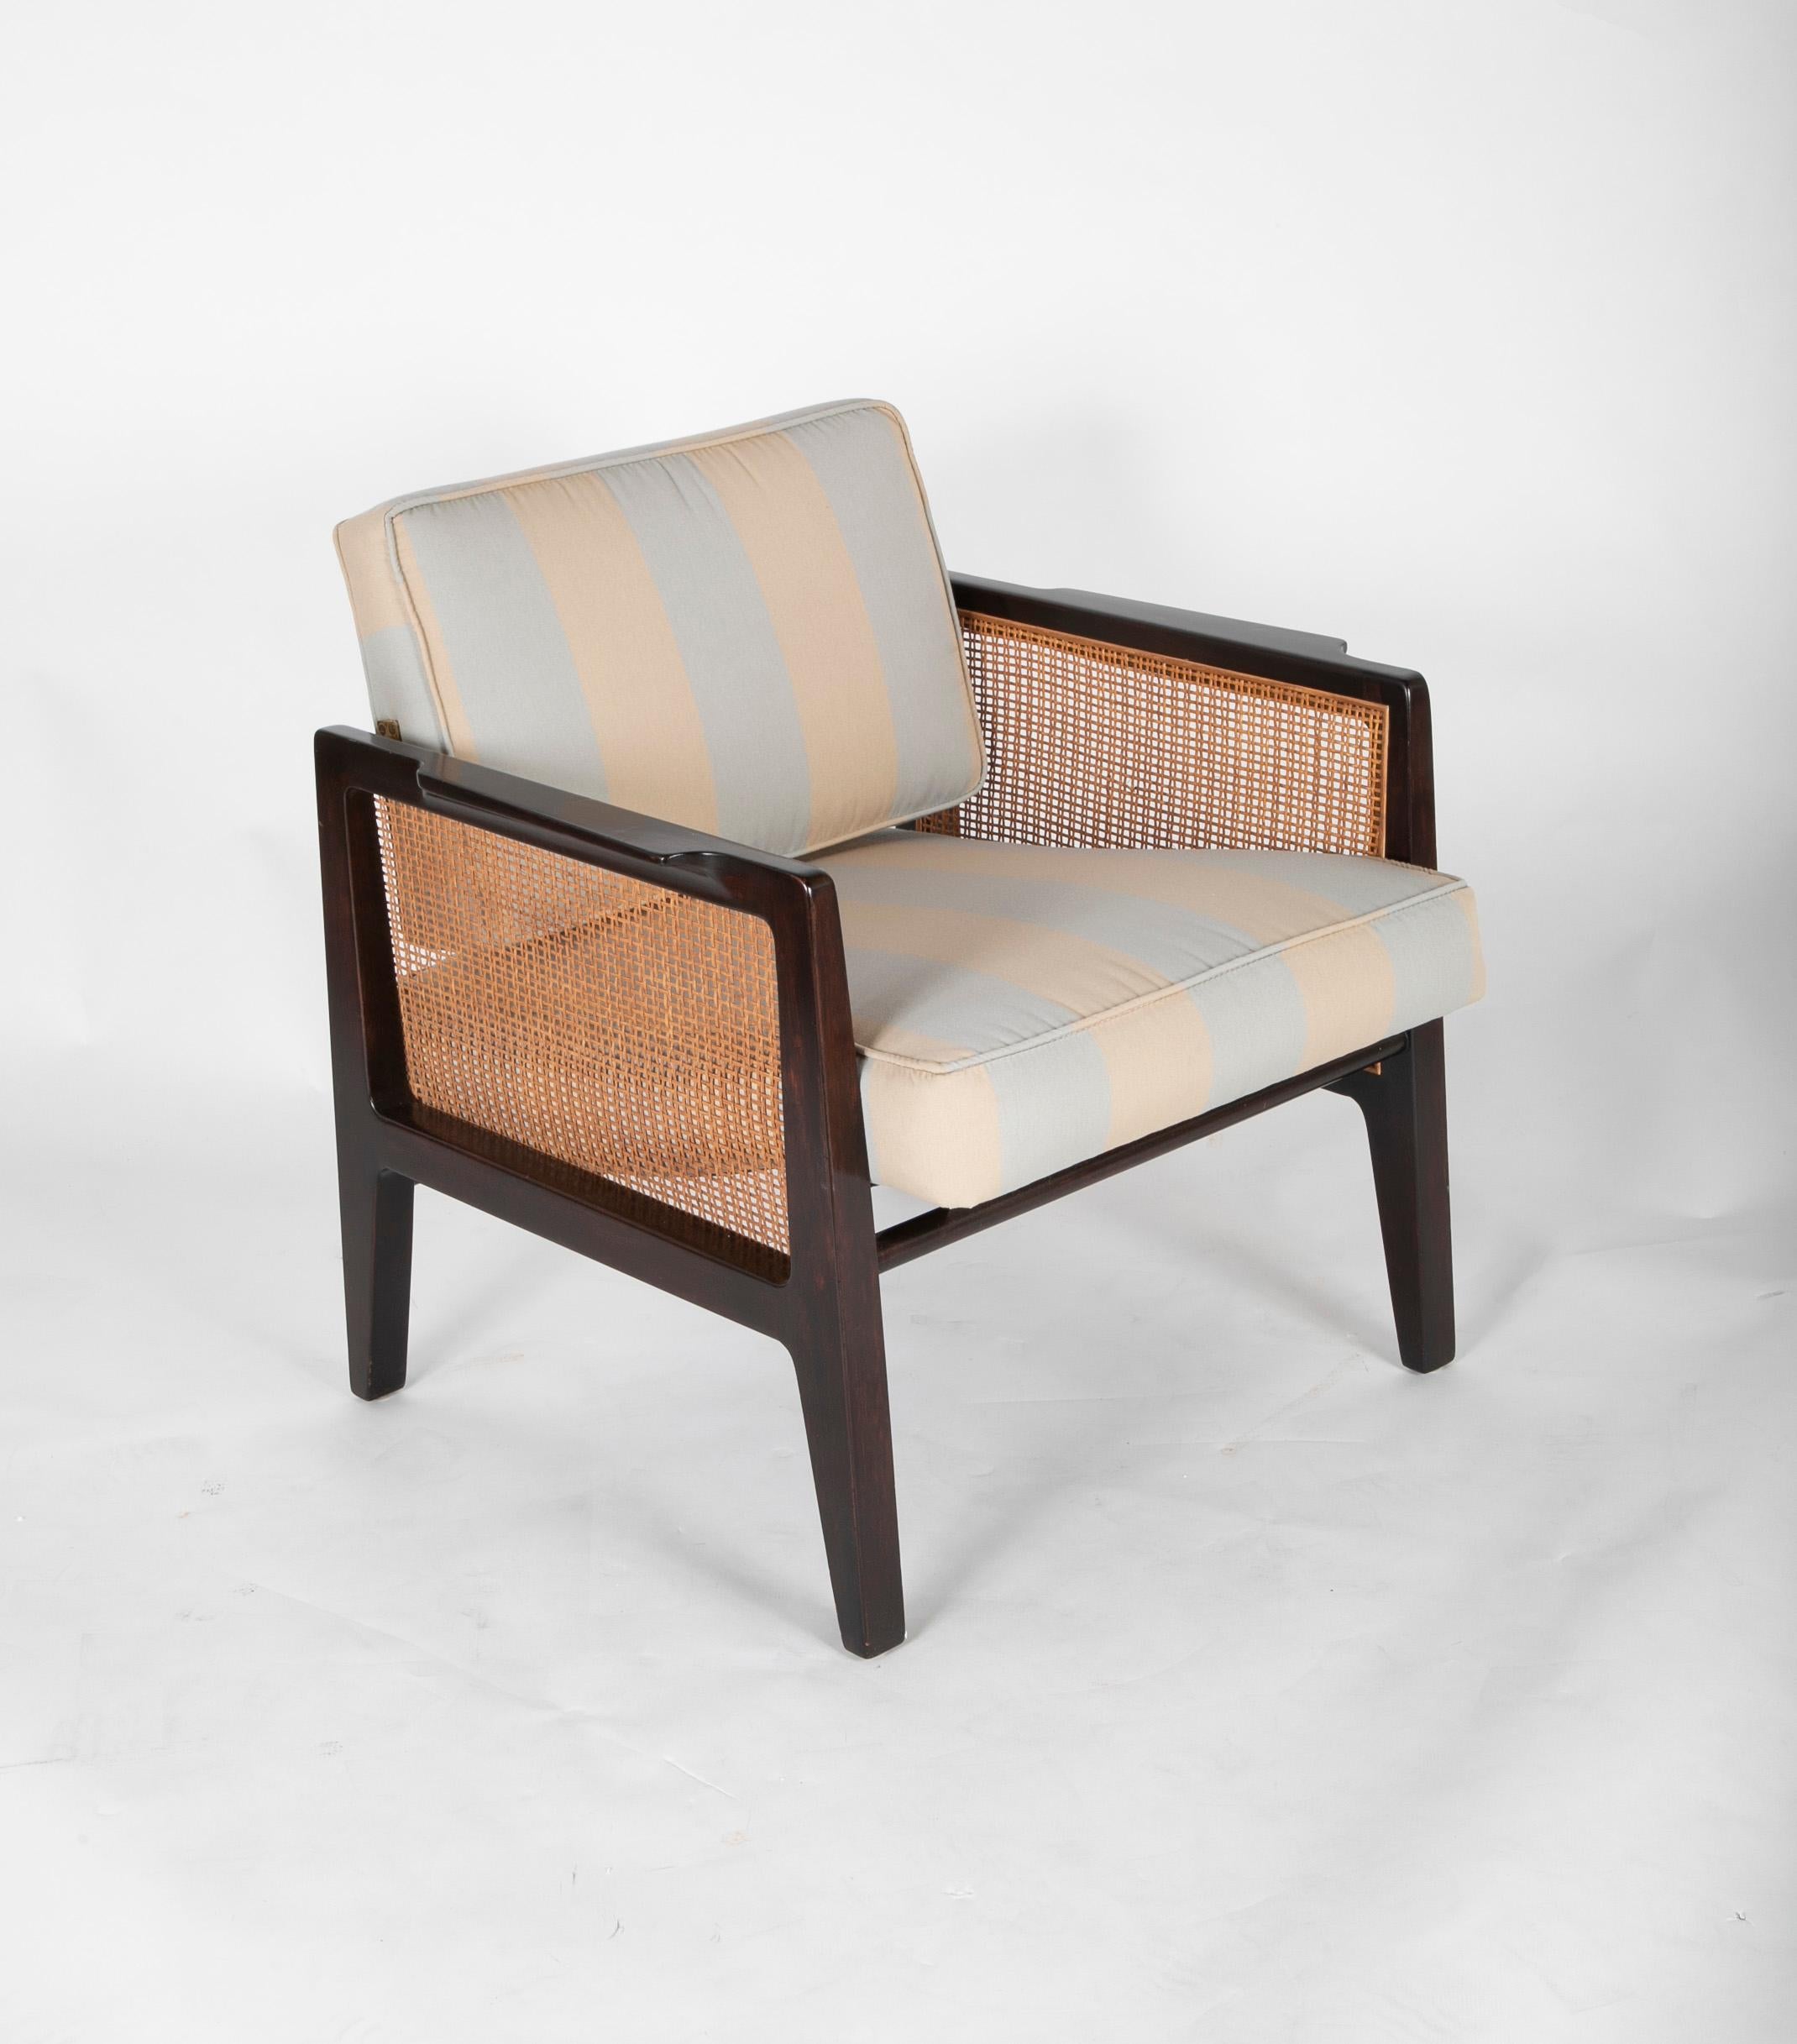 A sharp looking ebonized chair with caned side panels designed by Edward Wormley for Dunbar.